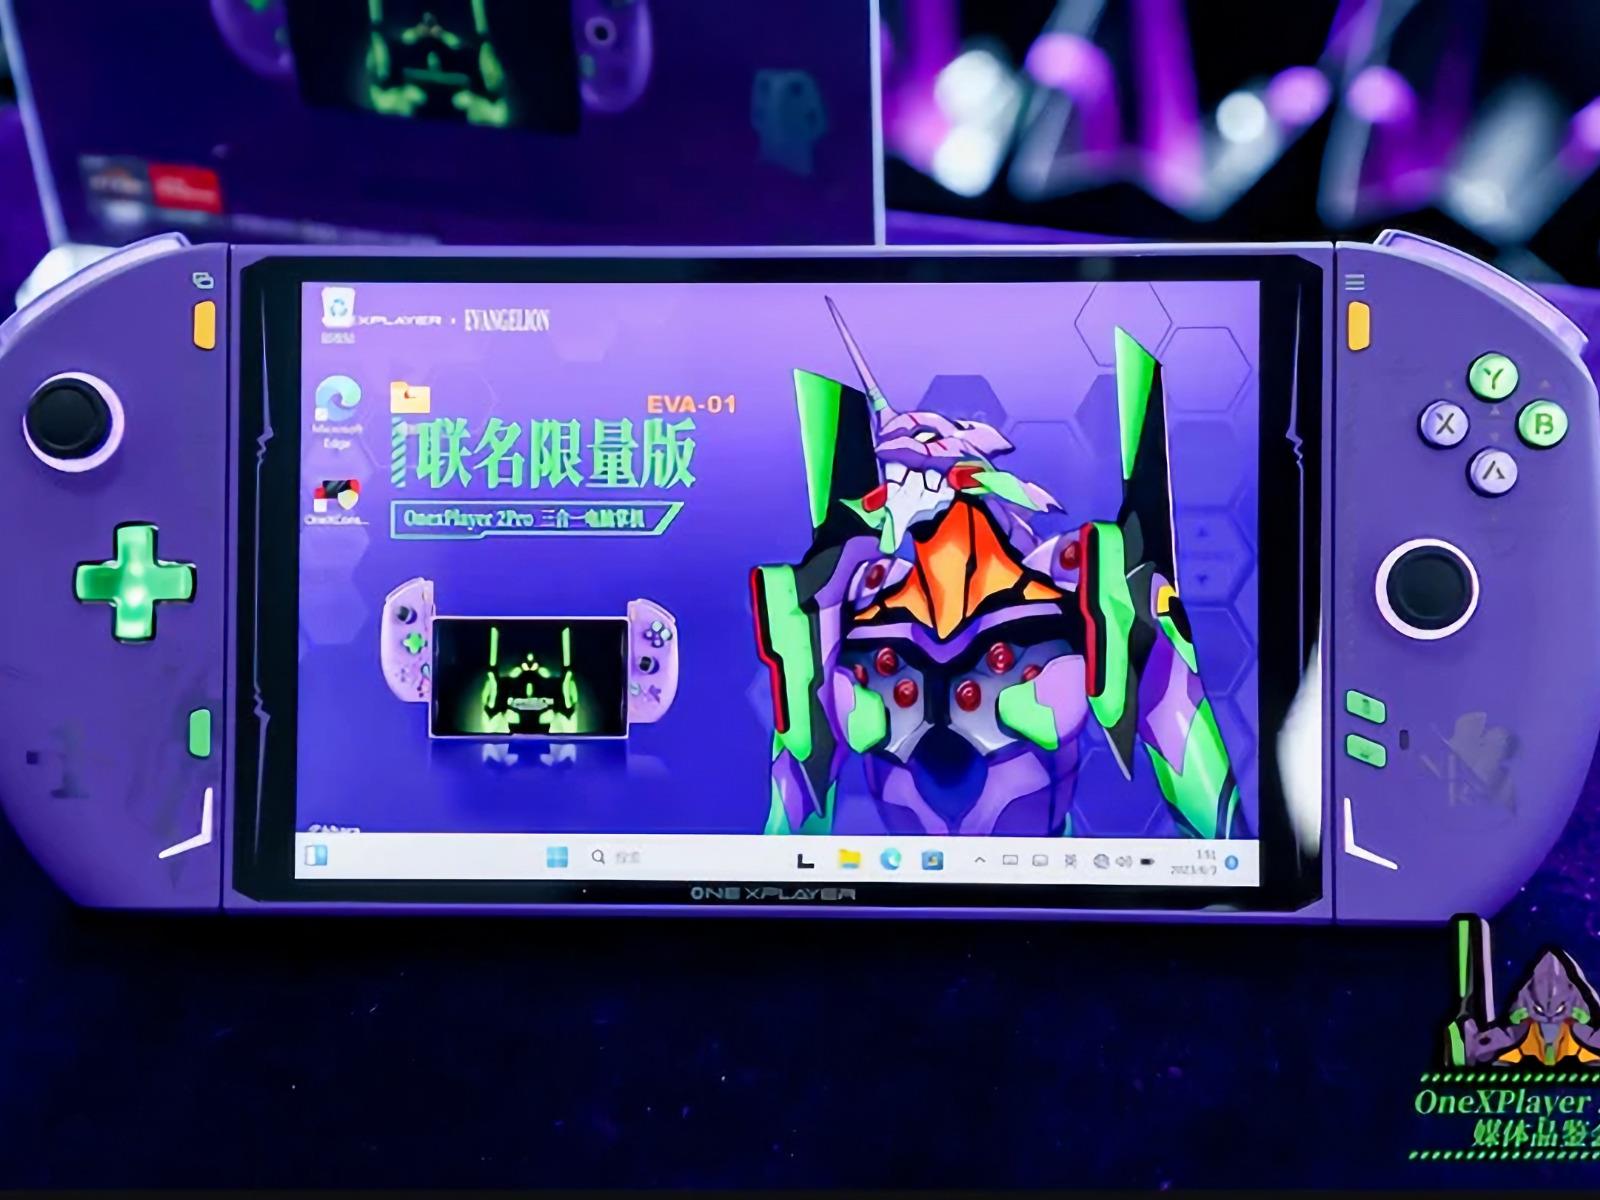 OneXPlayer 2 Pro Handheld Is Coming To Challenge The ASUS ROG Ally